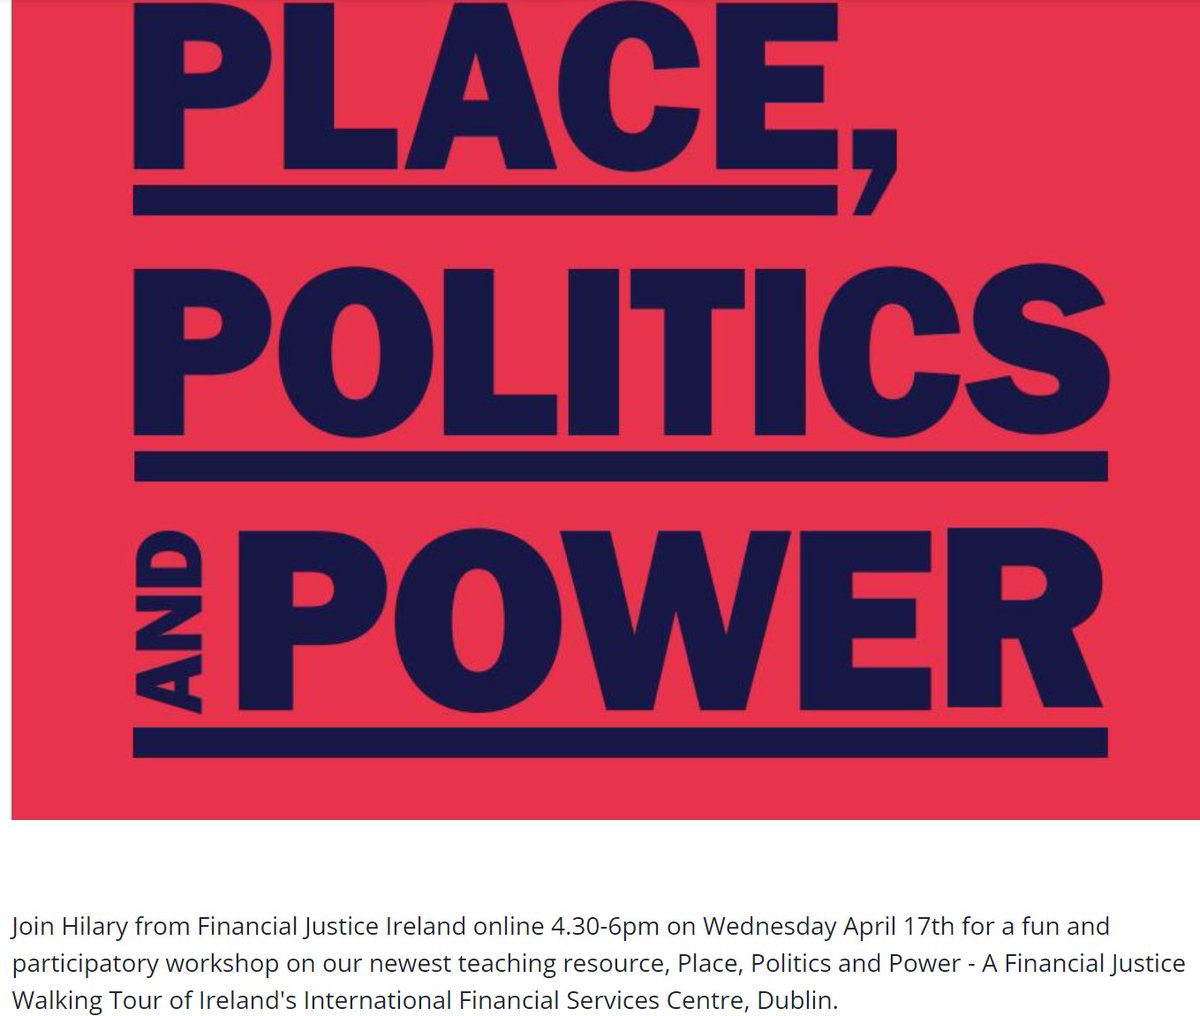 Upcoming workshops with @FinJusticeIre All FREE & worthwhile. Info here👇 Wed Apr 10th: twitter.com/FinJusticeIre/… Thurs Apr 11th & 18th: twitter.com/FinJusticeIre/… Wed Apr 17th : twitter.com/FinJusticeIre/…